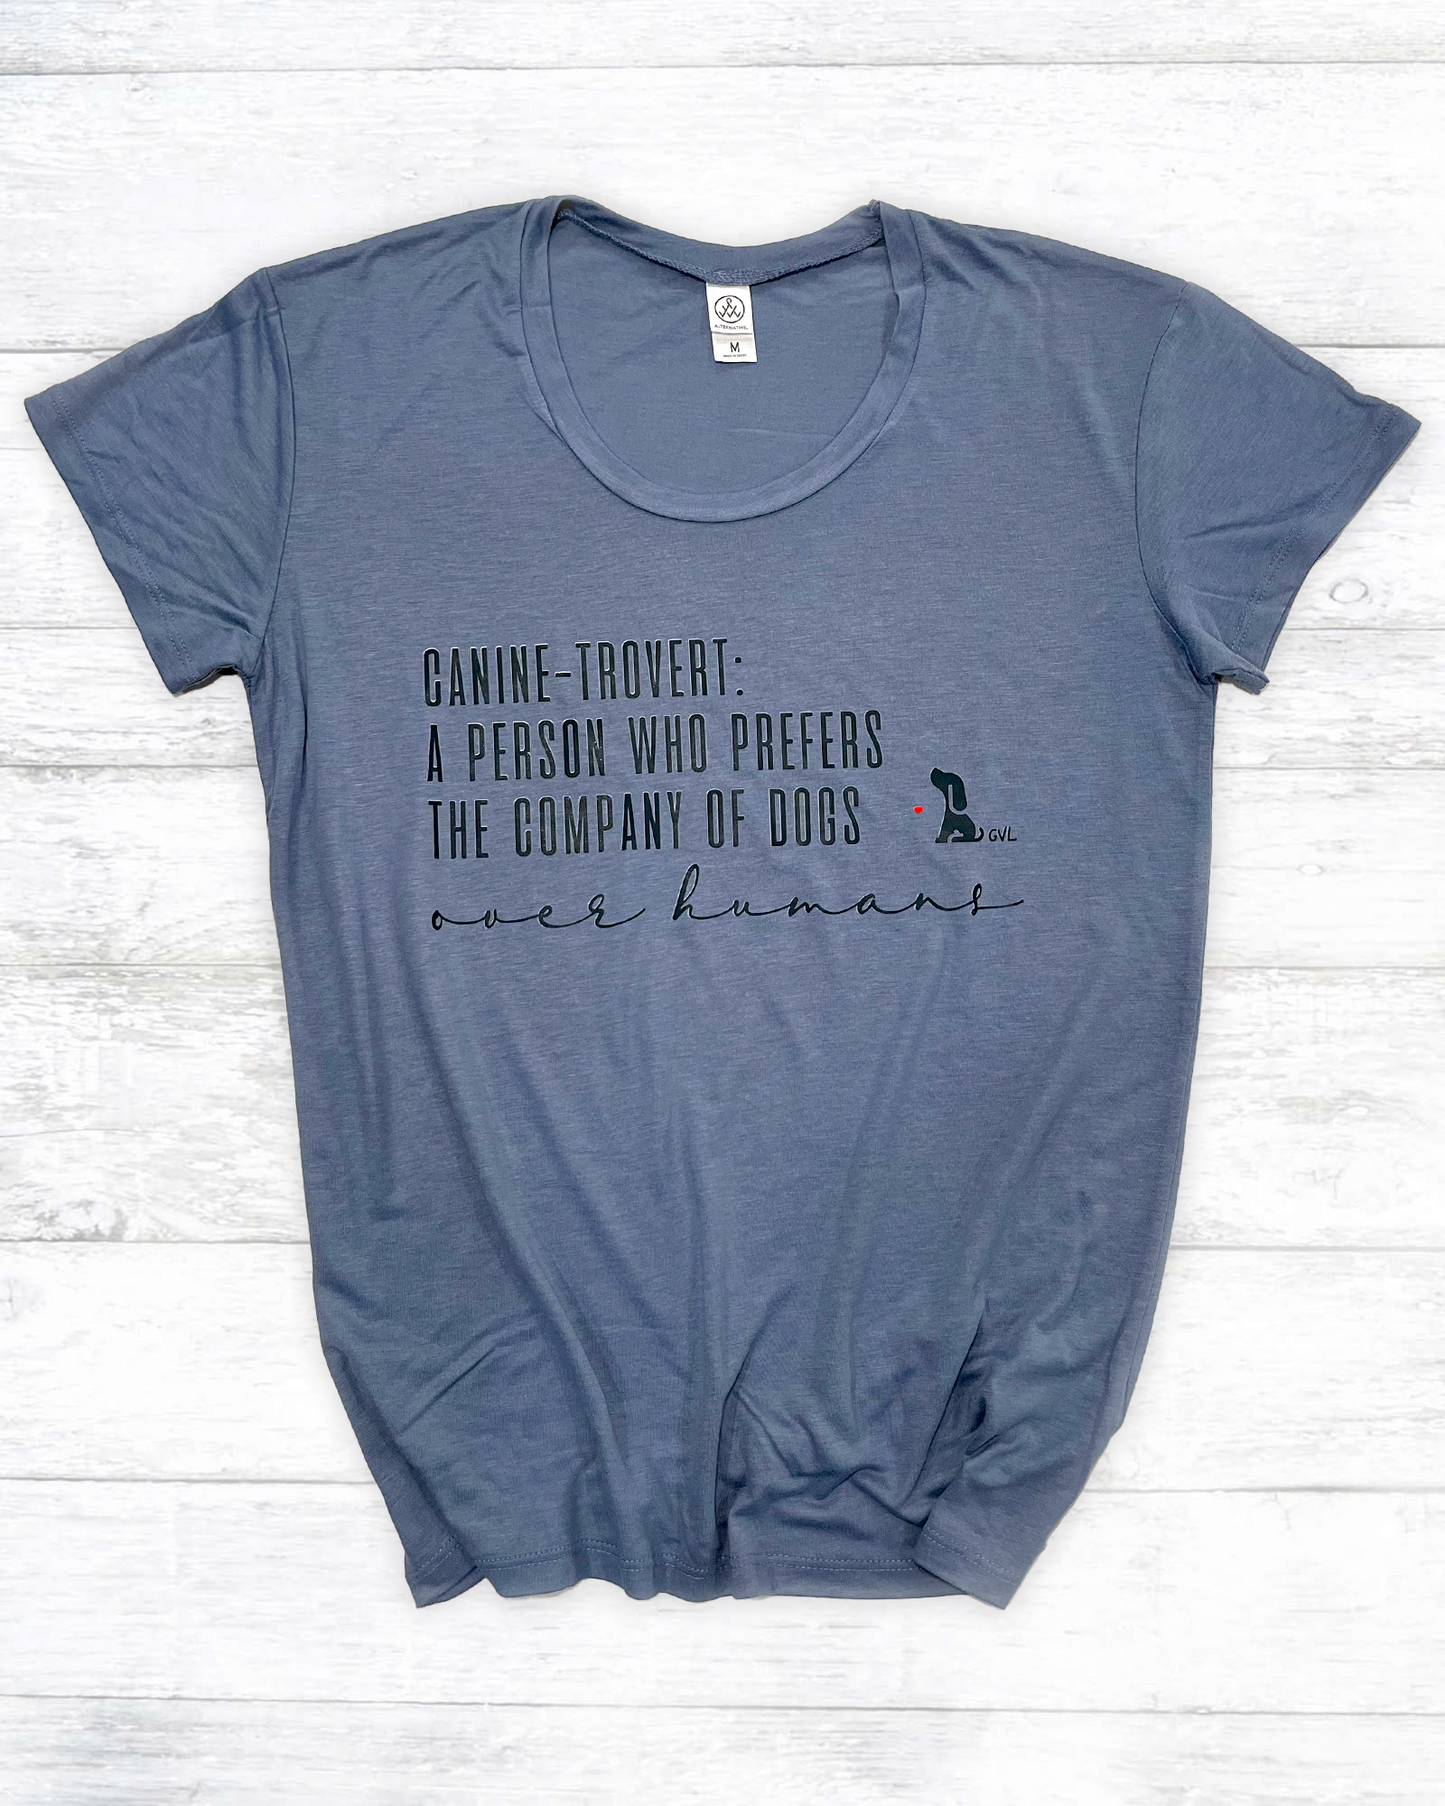 Women's "Canine-trovert: A Person Who Prefers The Company of Dogs Over Humans" Slinky Jersey Tee